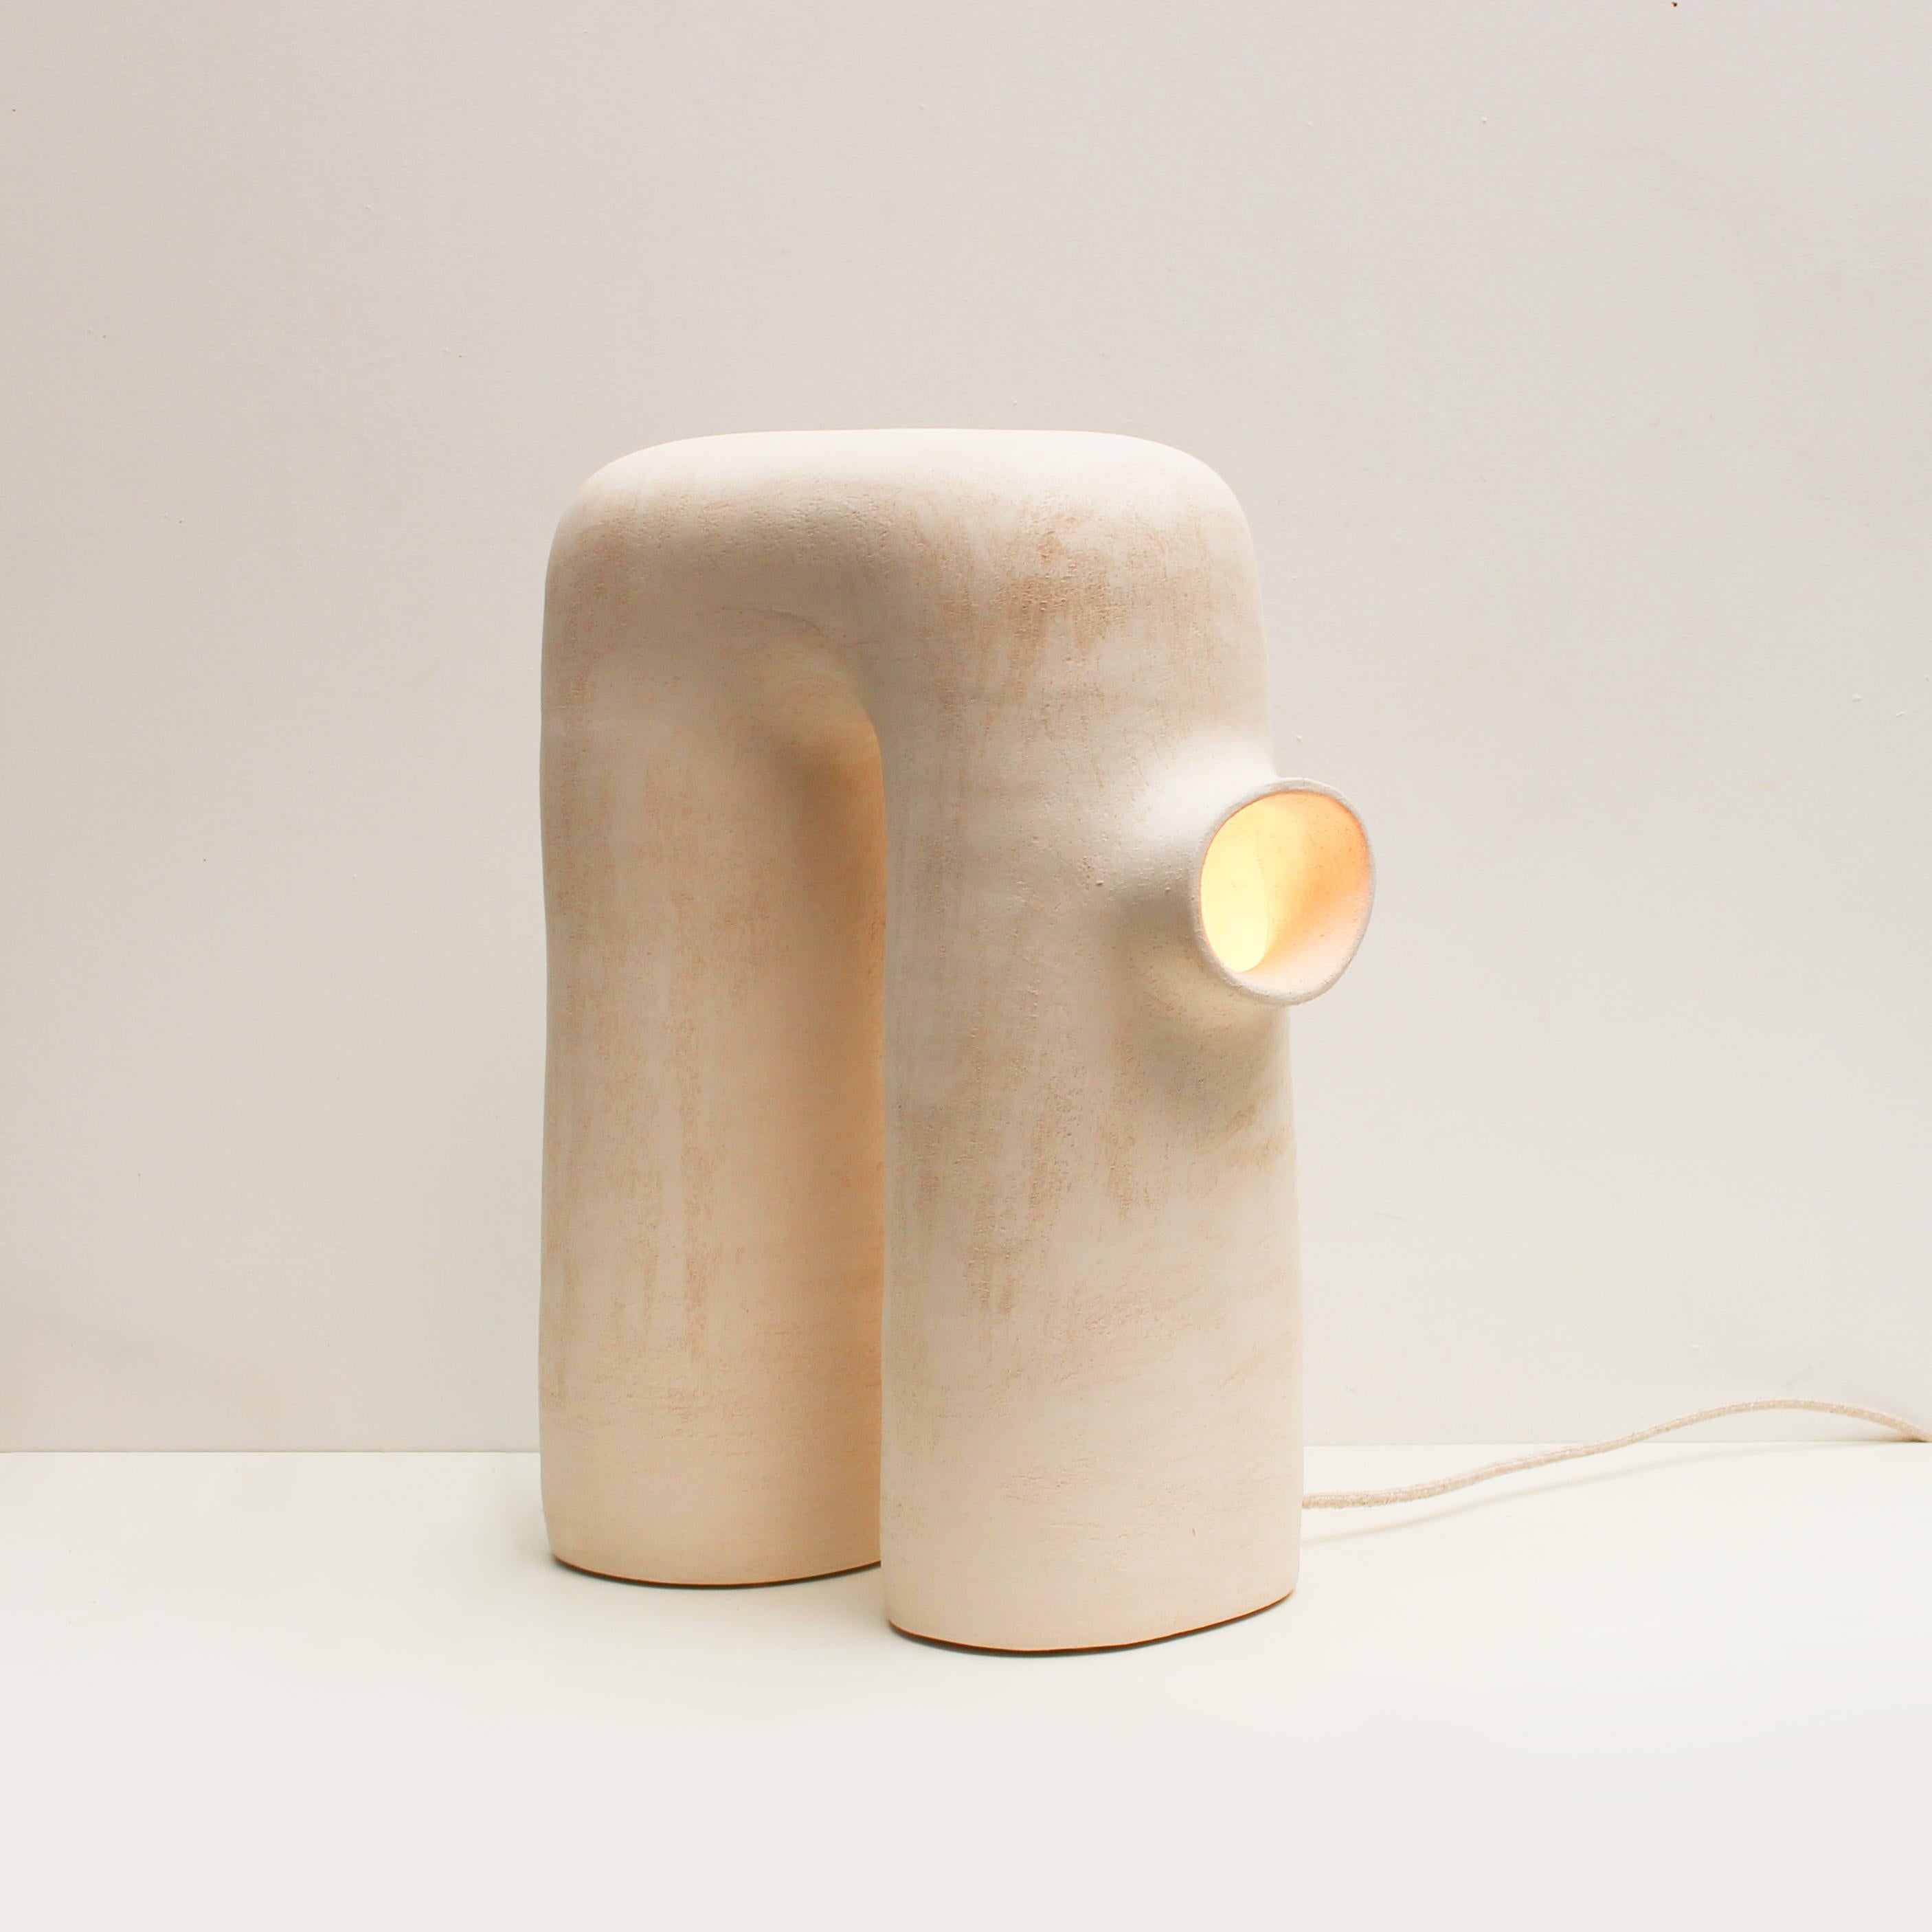 Refuge #14 stoneware lamp by Elisa Uberti
Limited Edition of 4 numbered pieces.
Dimensions: H 50 cm.
Materials: white stoneware.
This product is handmade, dimensions may vary.

After fifteen years in fashion, Elisa Uberti decides to take the